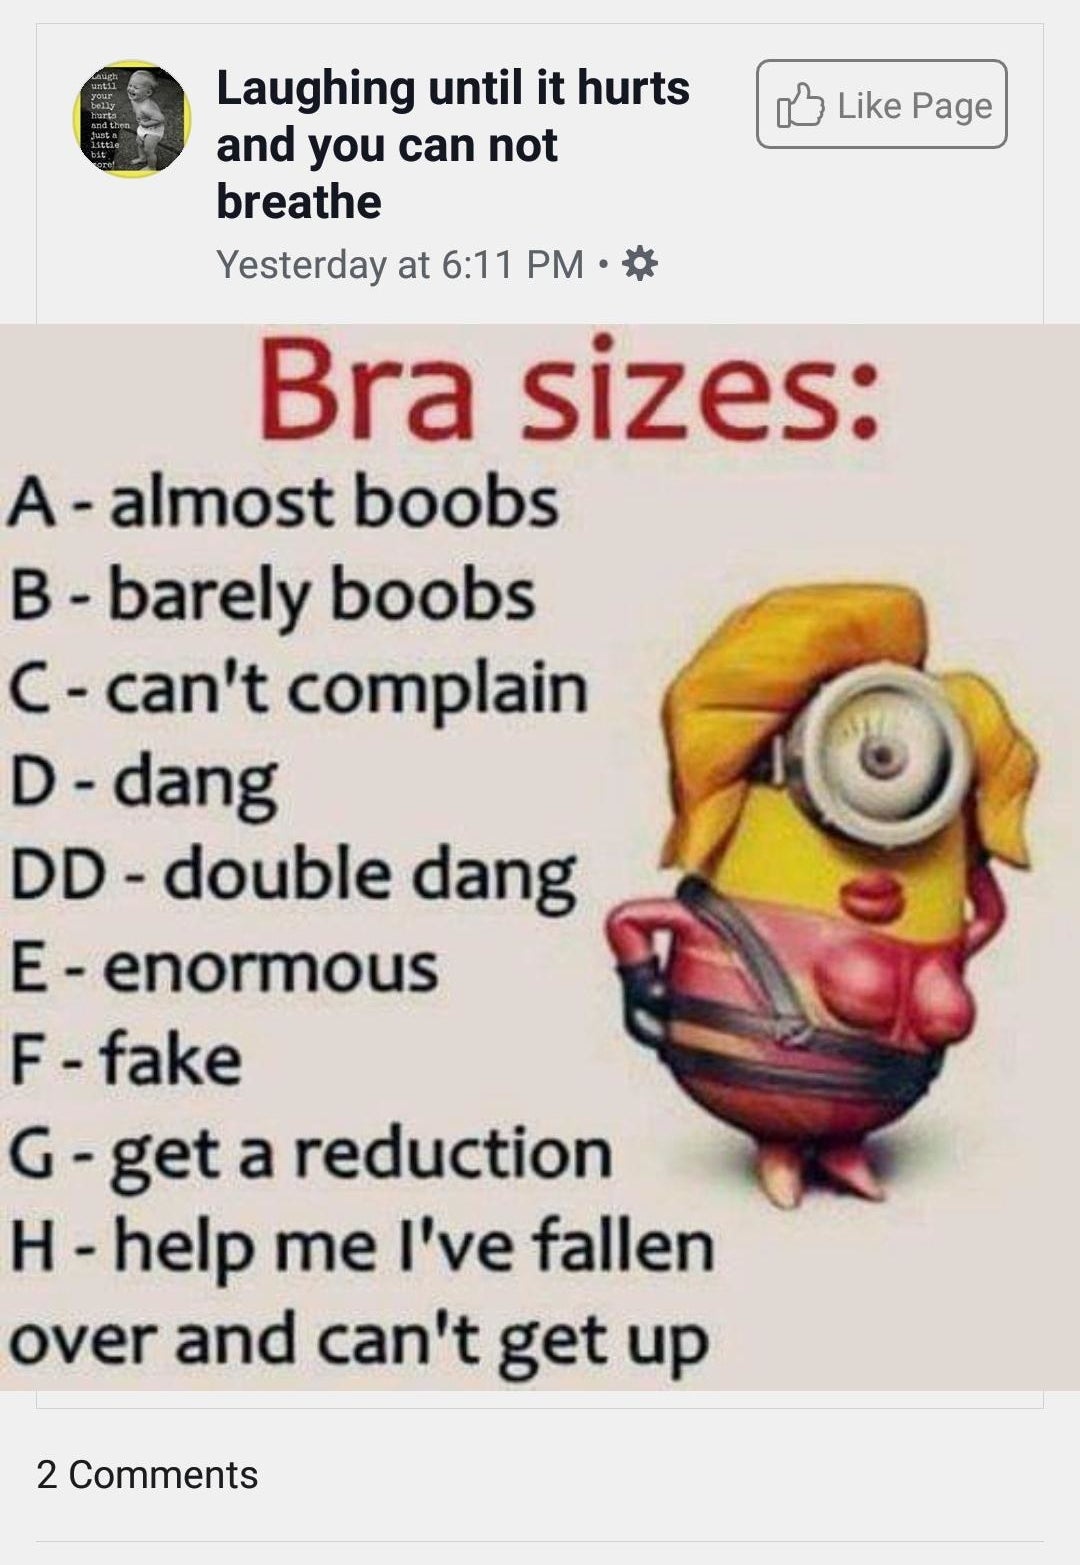 A particularly horrendous Minions meme that goes through what the various bra size letters stand for, for example DD is &quot;double dang&quot;